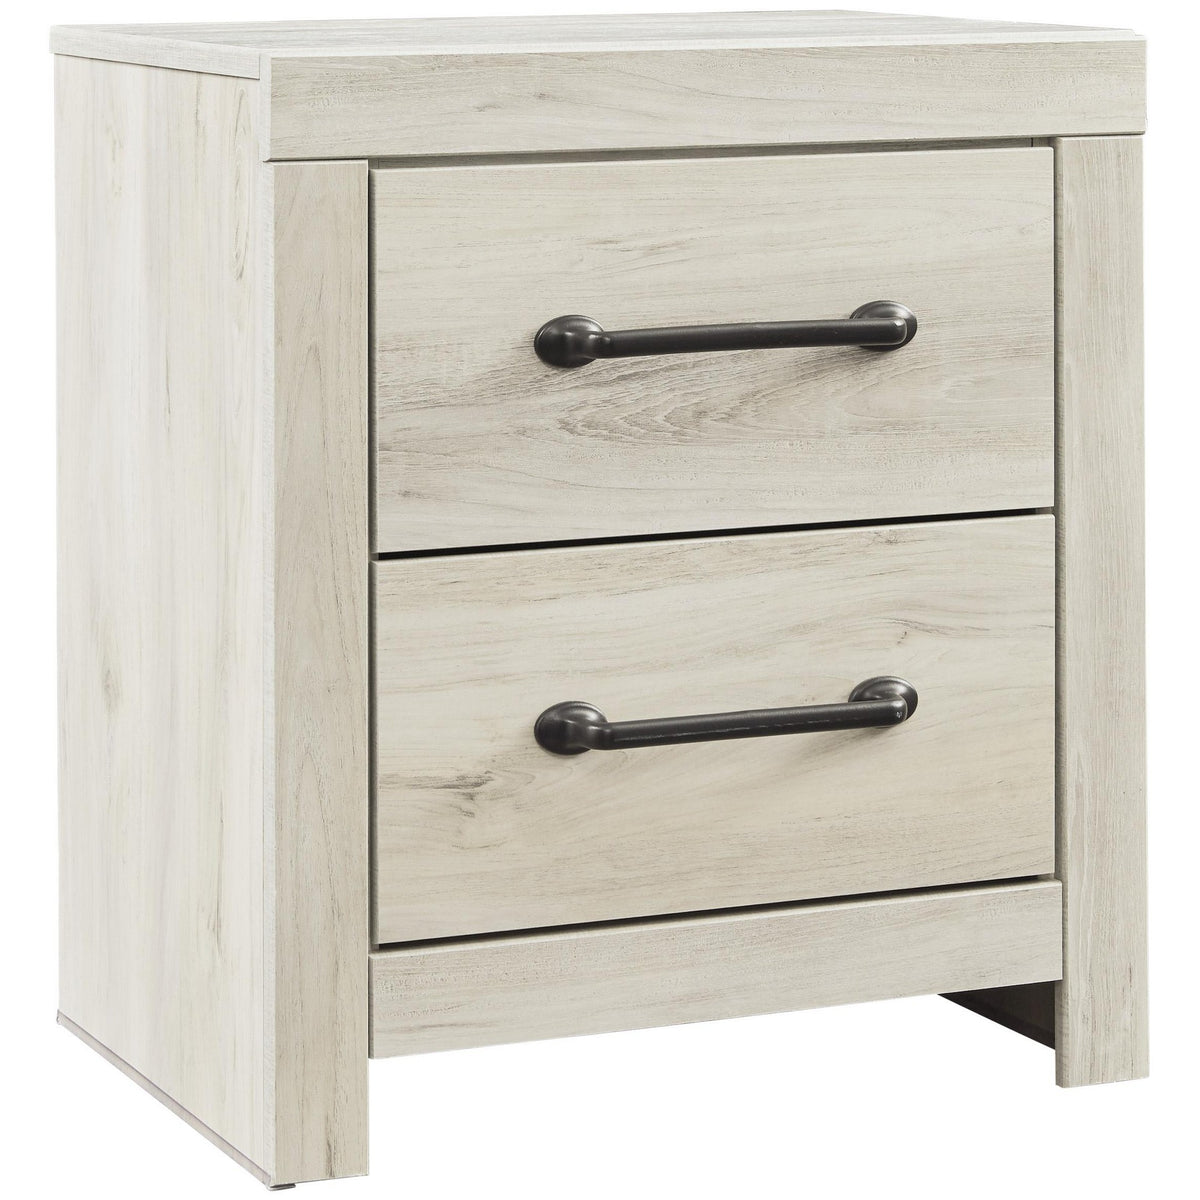 Transitional Wooden Two Drawer Setup Nightstand with Bar Handles in White - BM213351